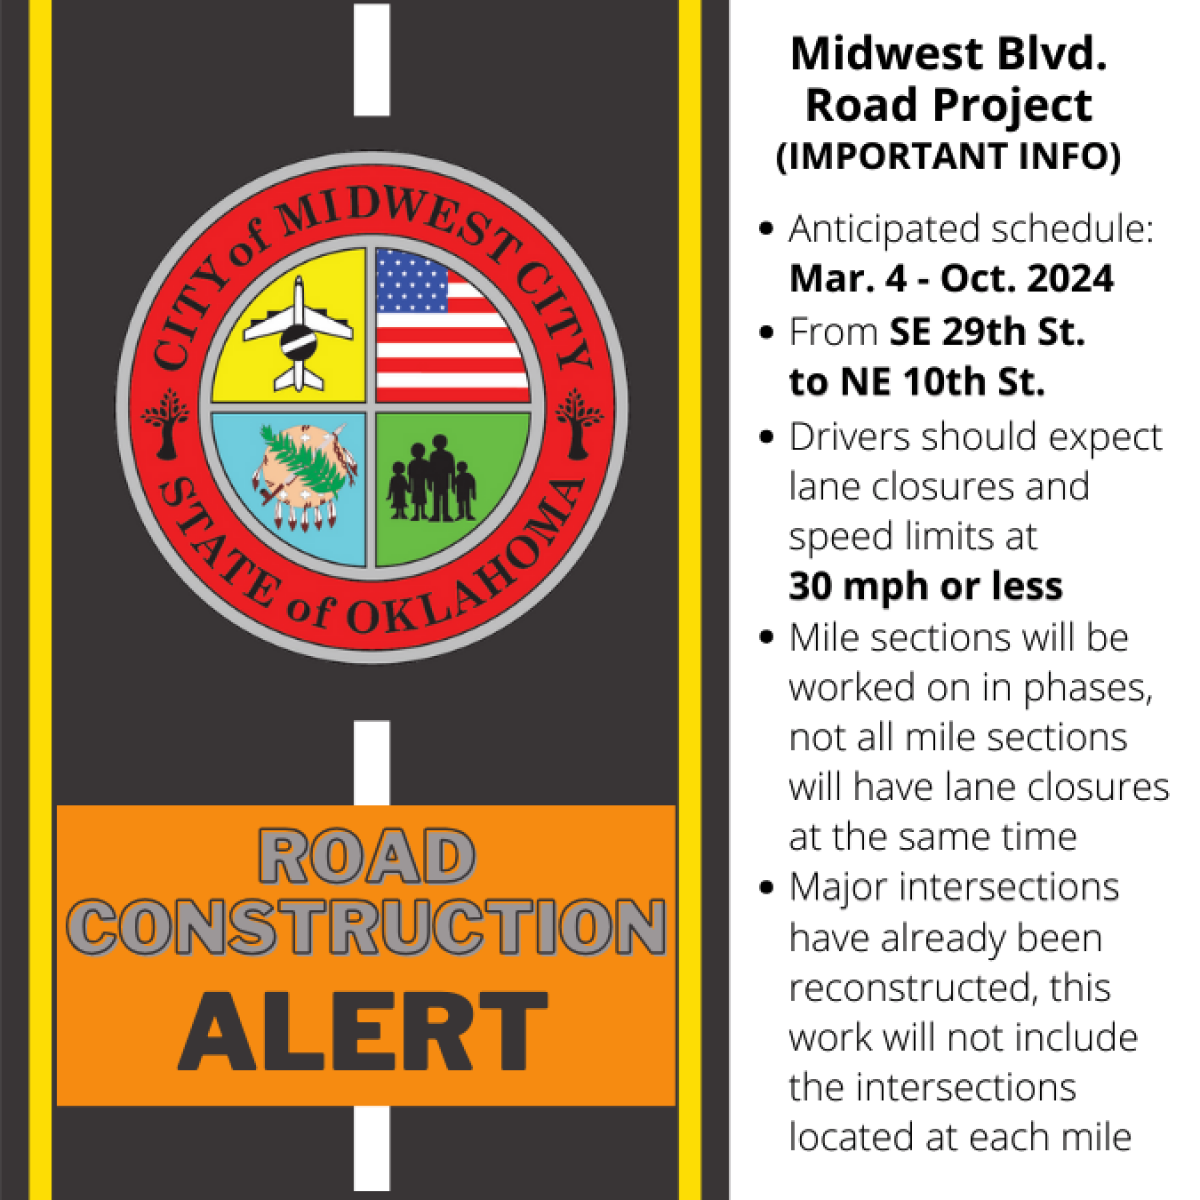 Information for Midwest Blvd. Construction project